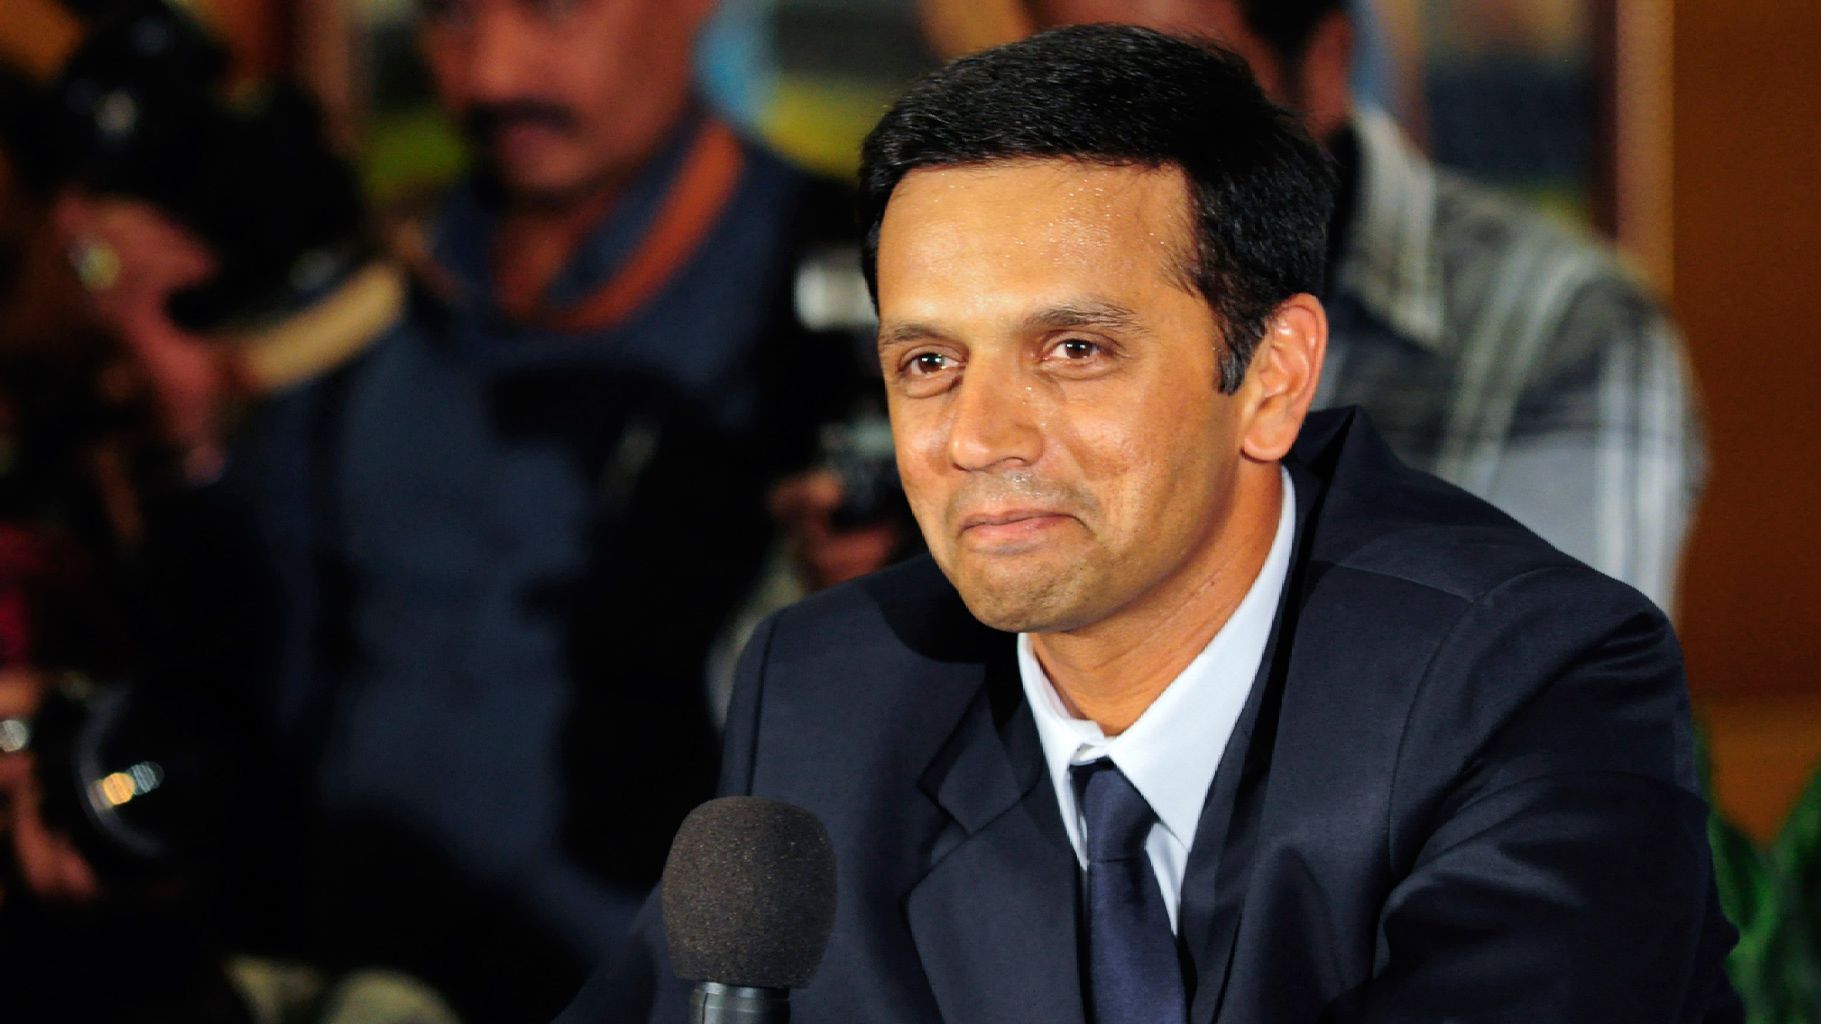 Rahul Dravid is the new head coach of the Indian cricket team